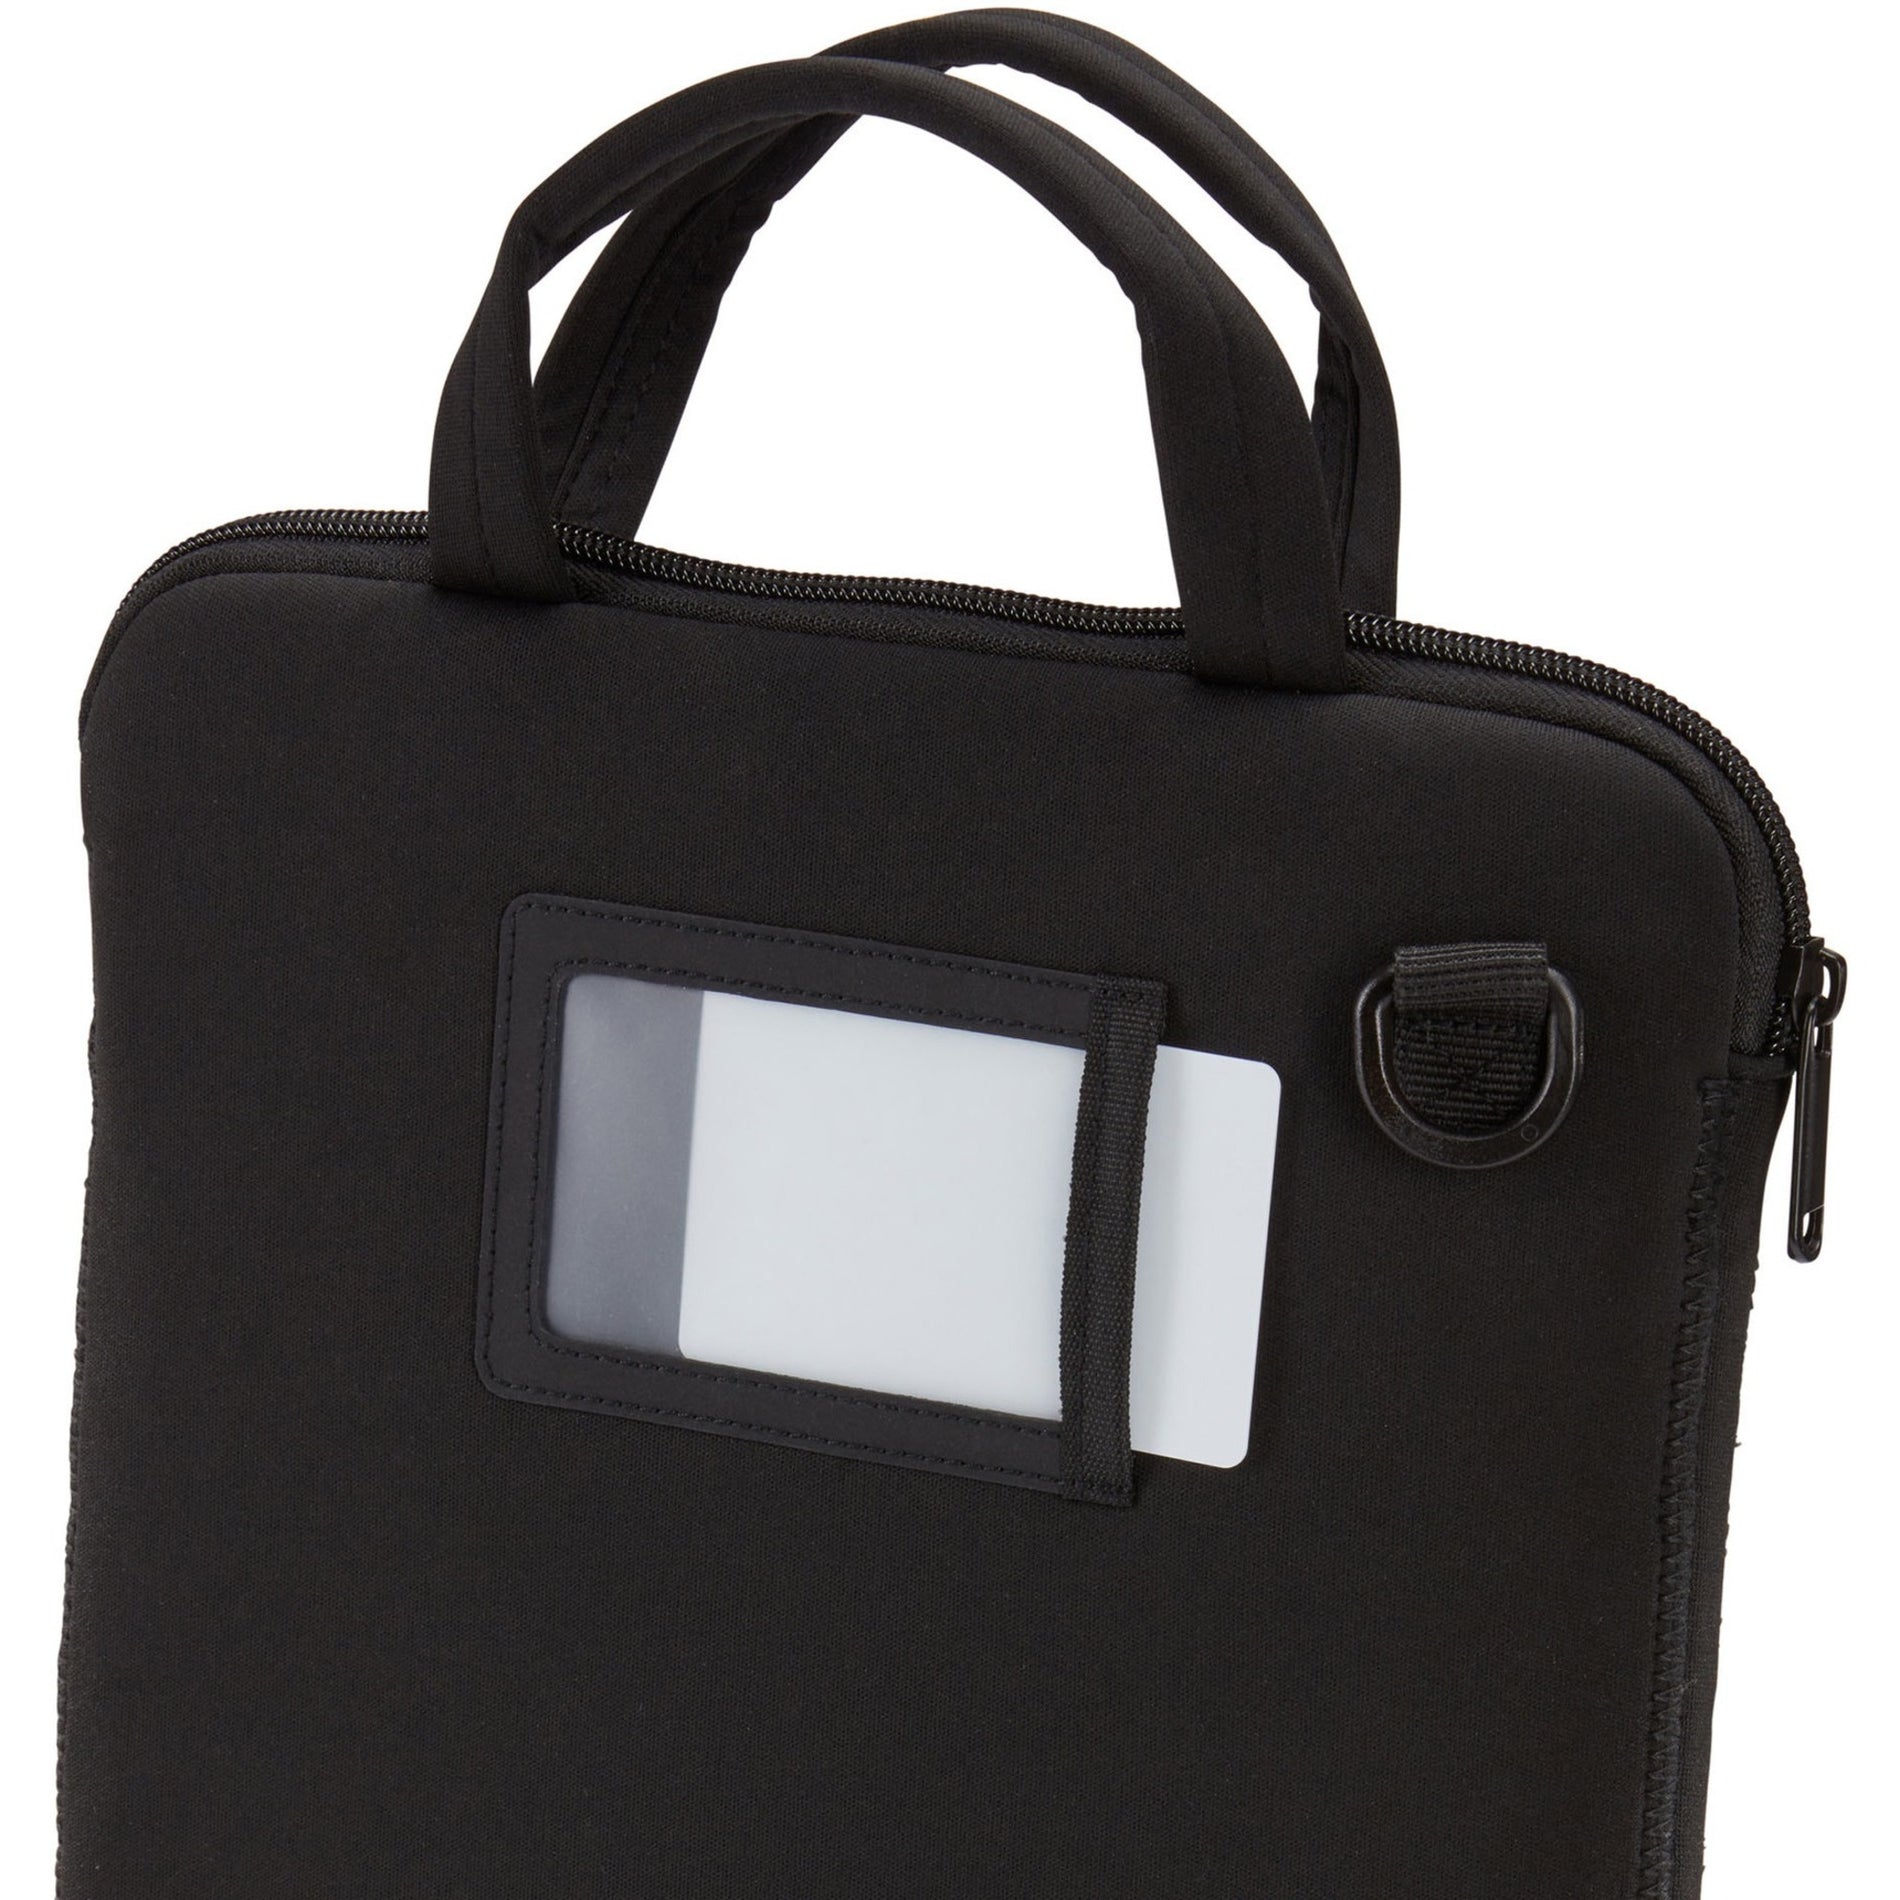 Case Logic 3204734 Quantic 14" Chromebook Sleeve, Black - 25 Year Warranty, Polyester Material